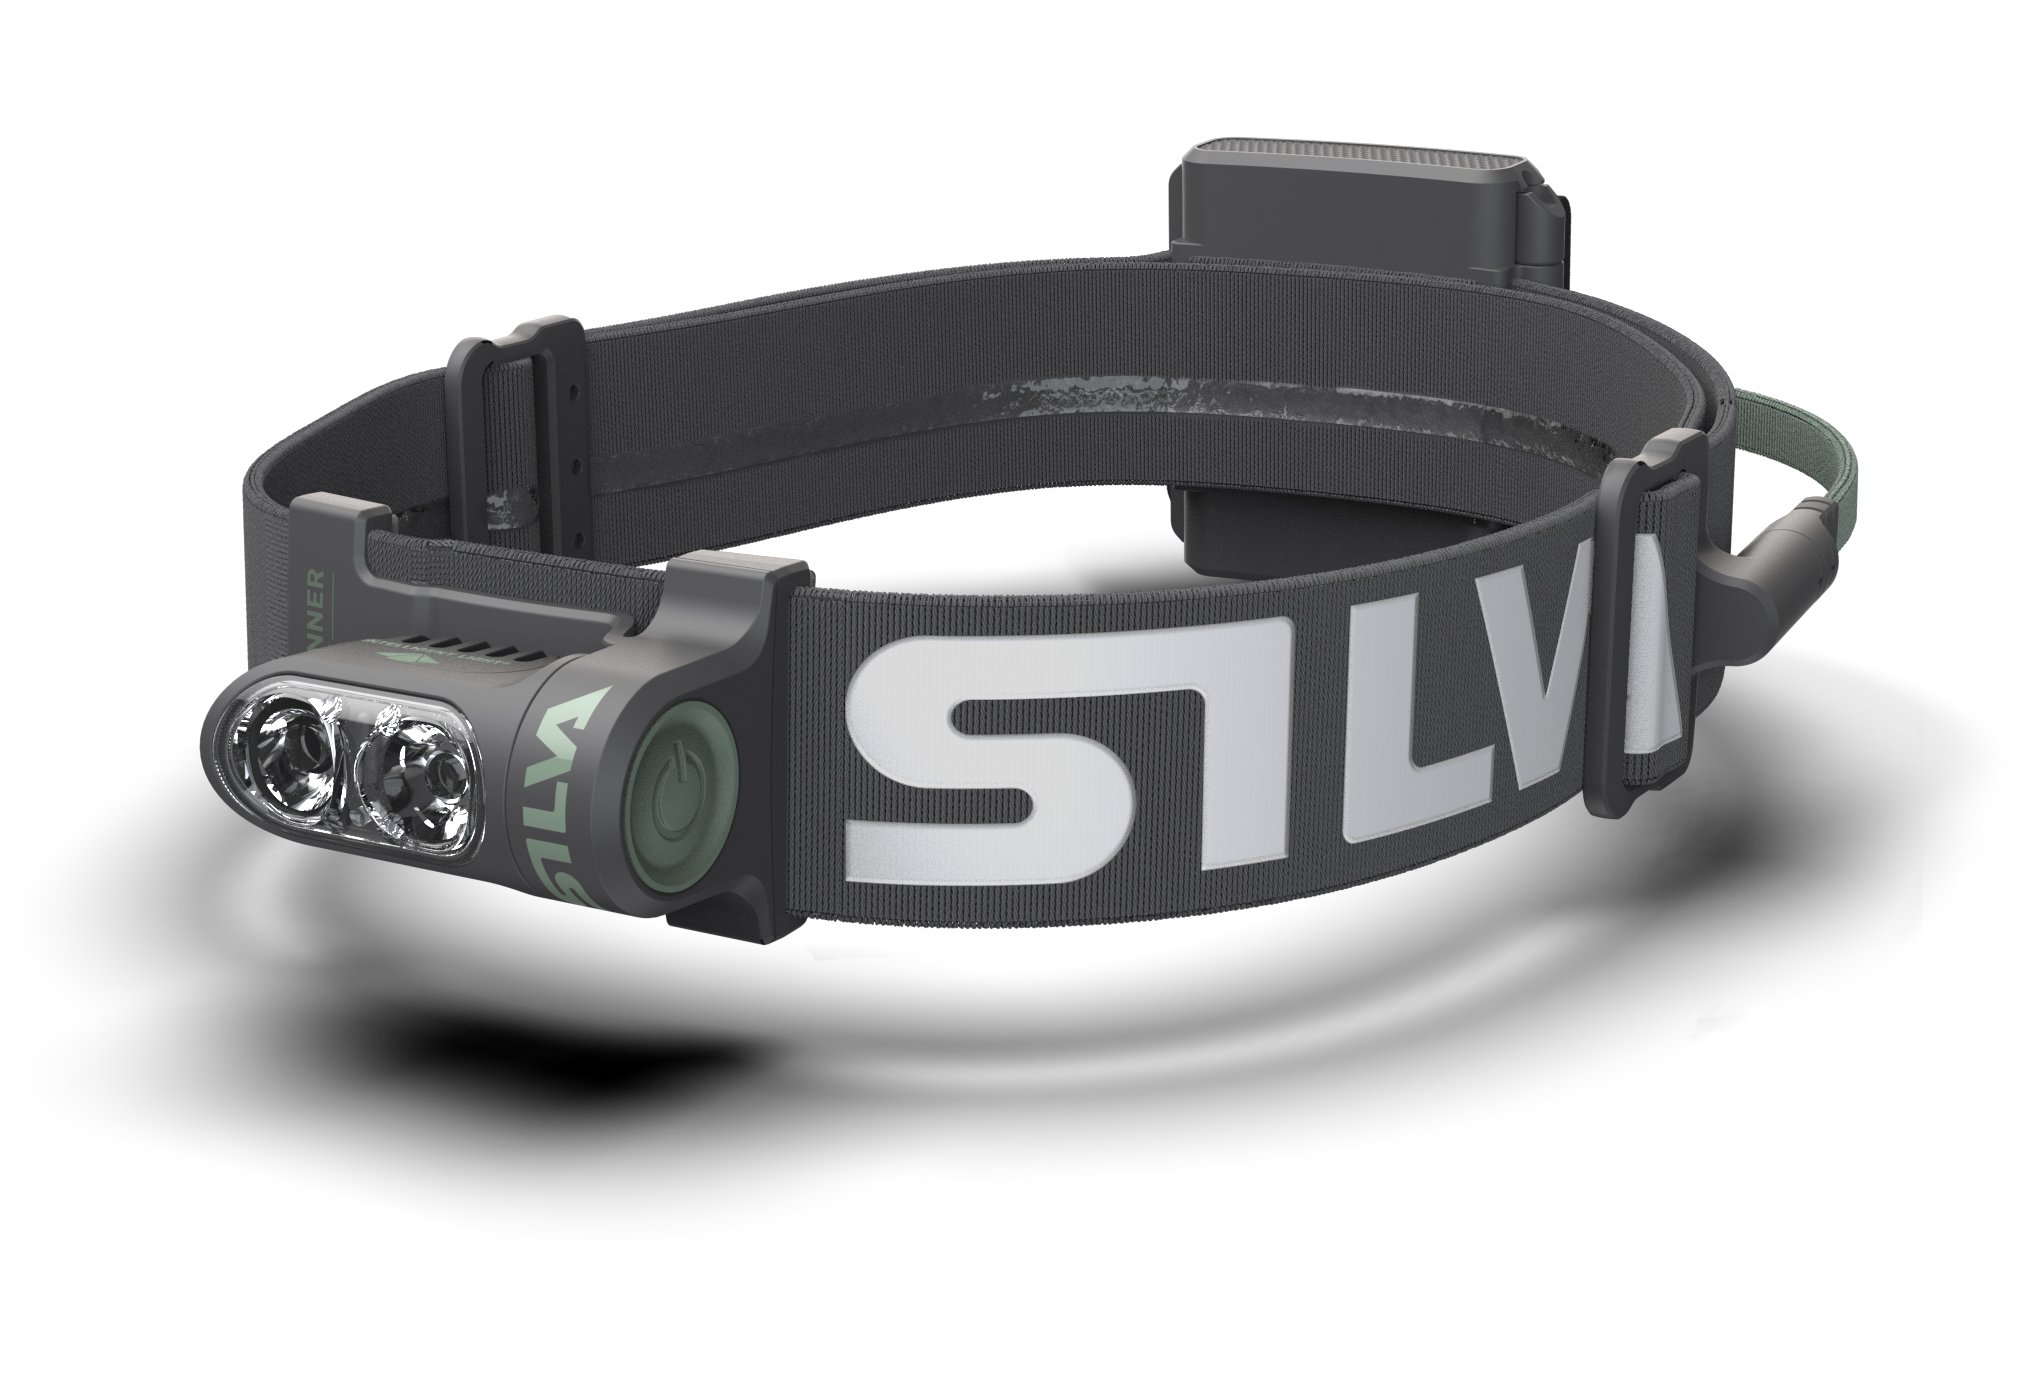 Silva Trail Runner Free 2 Hybrid Lampe frontale / éclairage